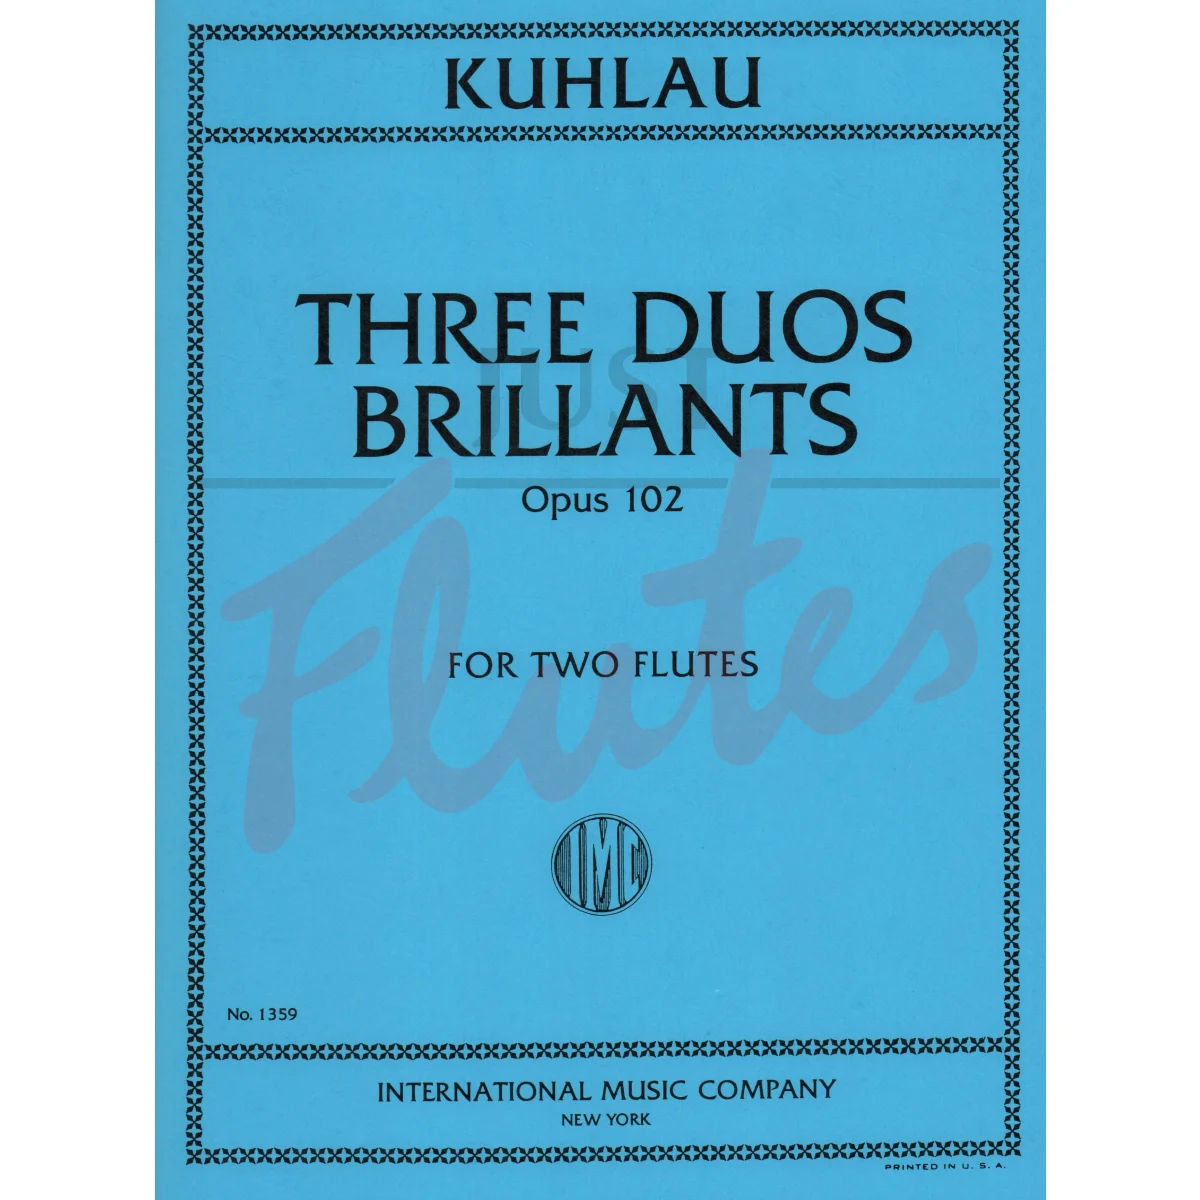 Three Duos Brillants for Two Flutes